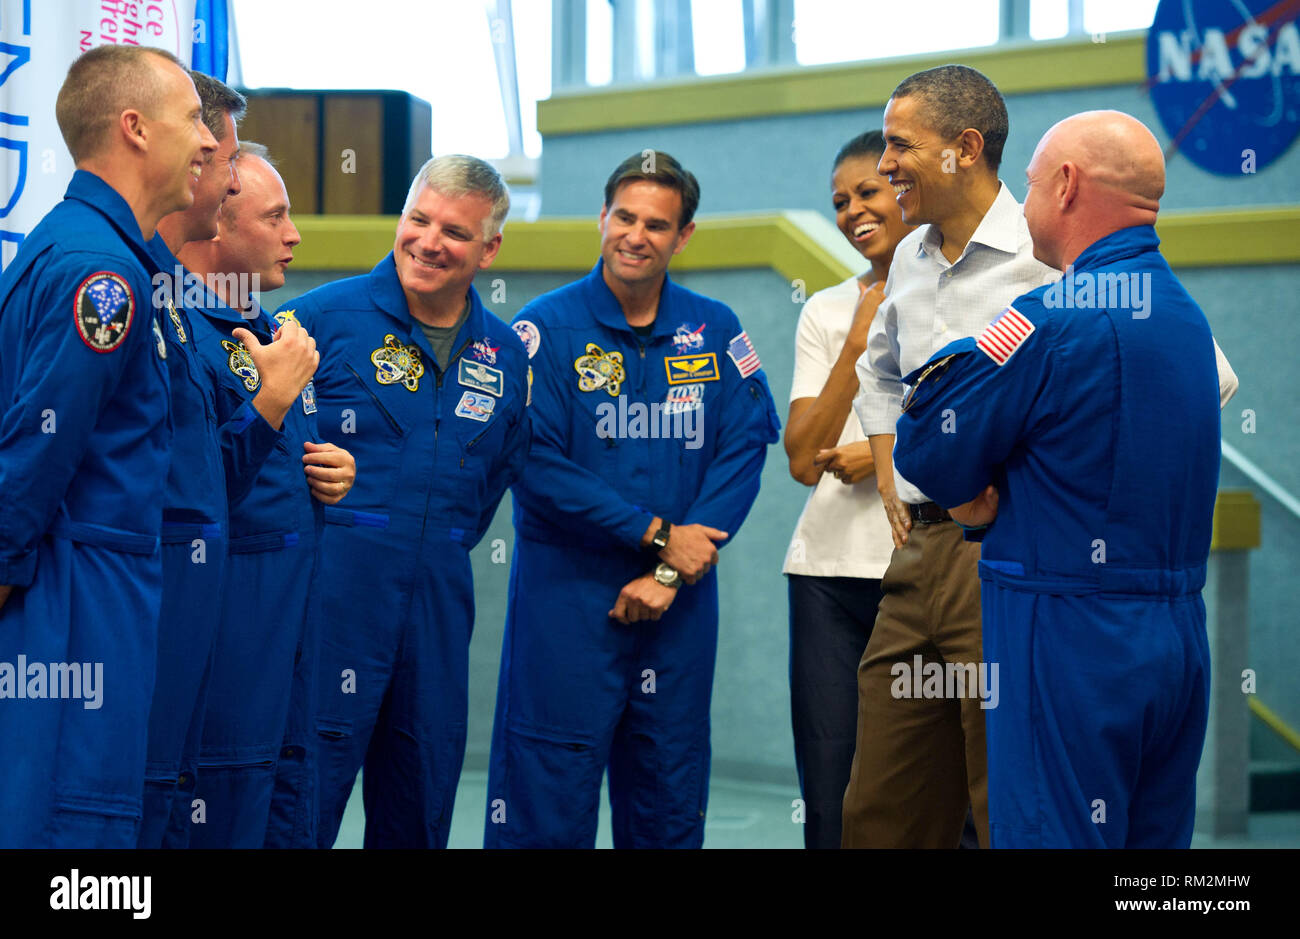 United States President Barack Obama and First Lady Michelle Obama meet with STS-134 space shuttle Endeavor commander Mark Kelly, right, and shuttle astronauts, from left, Andrew Feustel, European Space Agency's Roberto Vittori, Michael Fincke, Gregory H. Johnson, and Greg Chamitoff, after their launch was scrubbed, Friday, April 29, 2011, at Kennedy Space Center in Cape Canaveral, Florida..Mandatory Credit: Bill Ingalls / NASA via CNP /MediaPunch Stock Photo